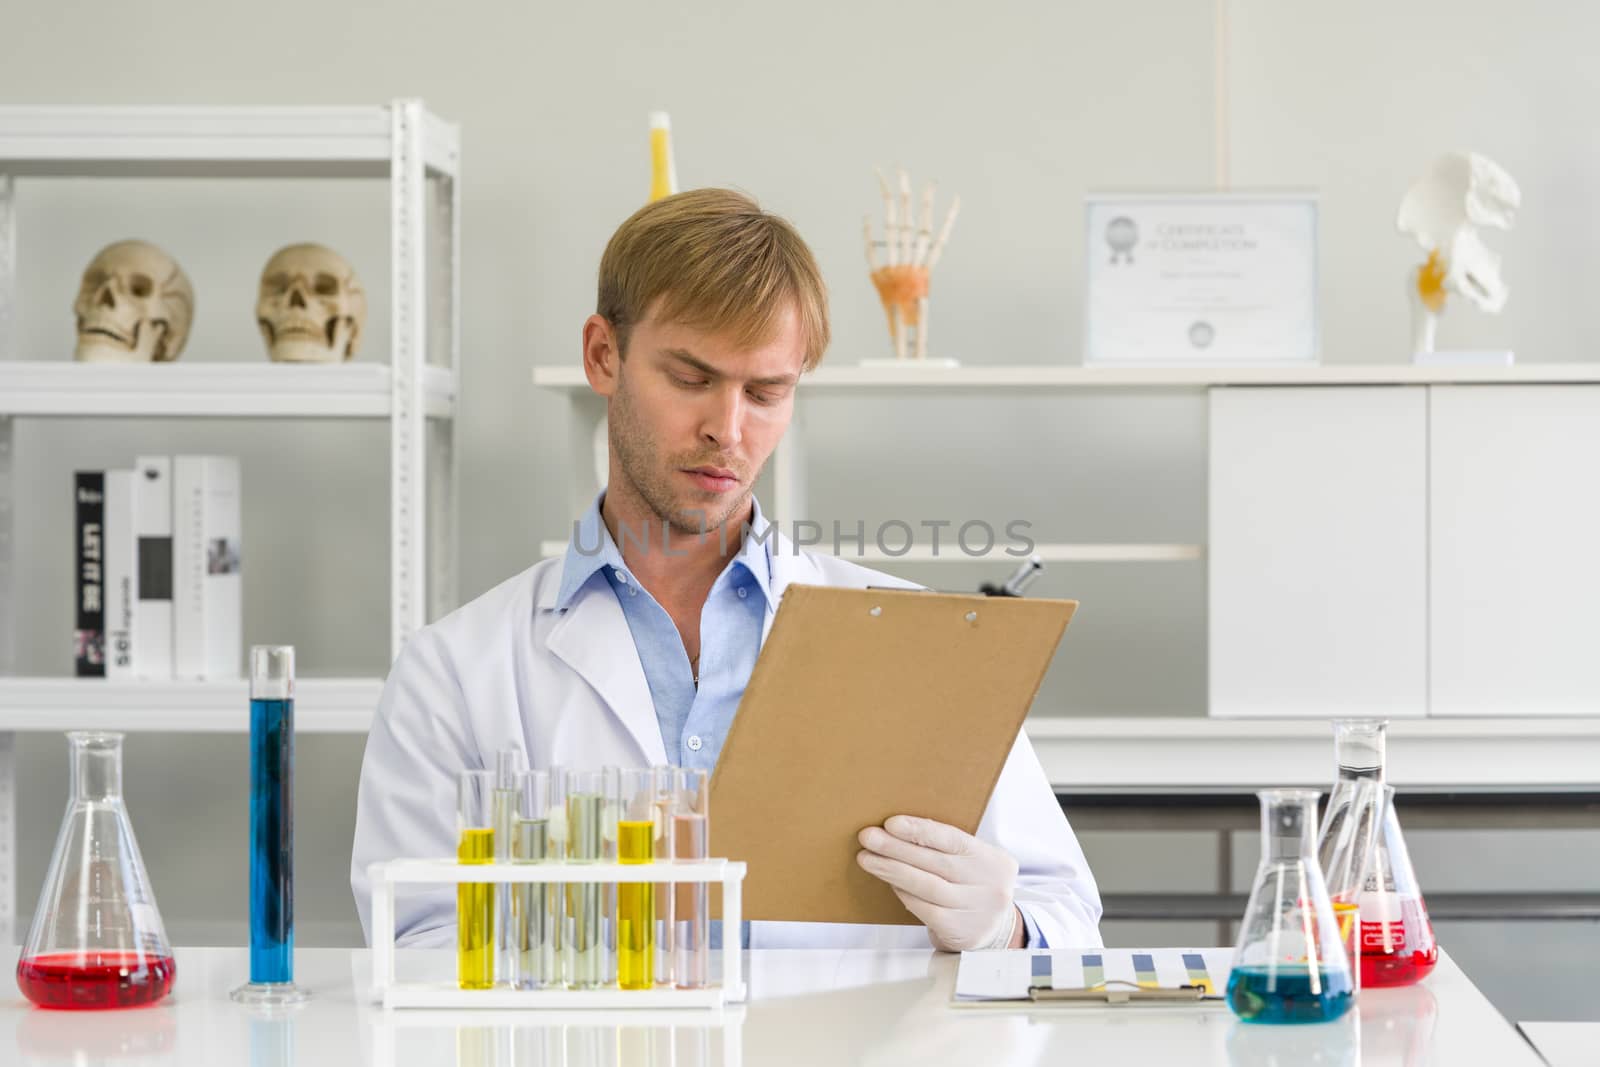 A young Brazilian scientist notes the results of his chemical compound research on the clipboard. Working atmosphere in chemical laboratory. Test tubes filled with chemicals on the table.